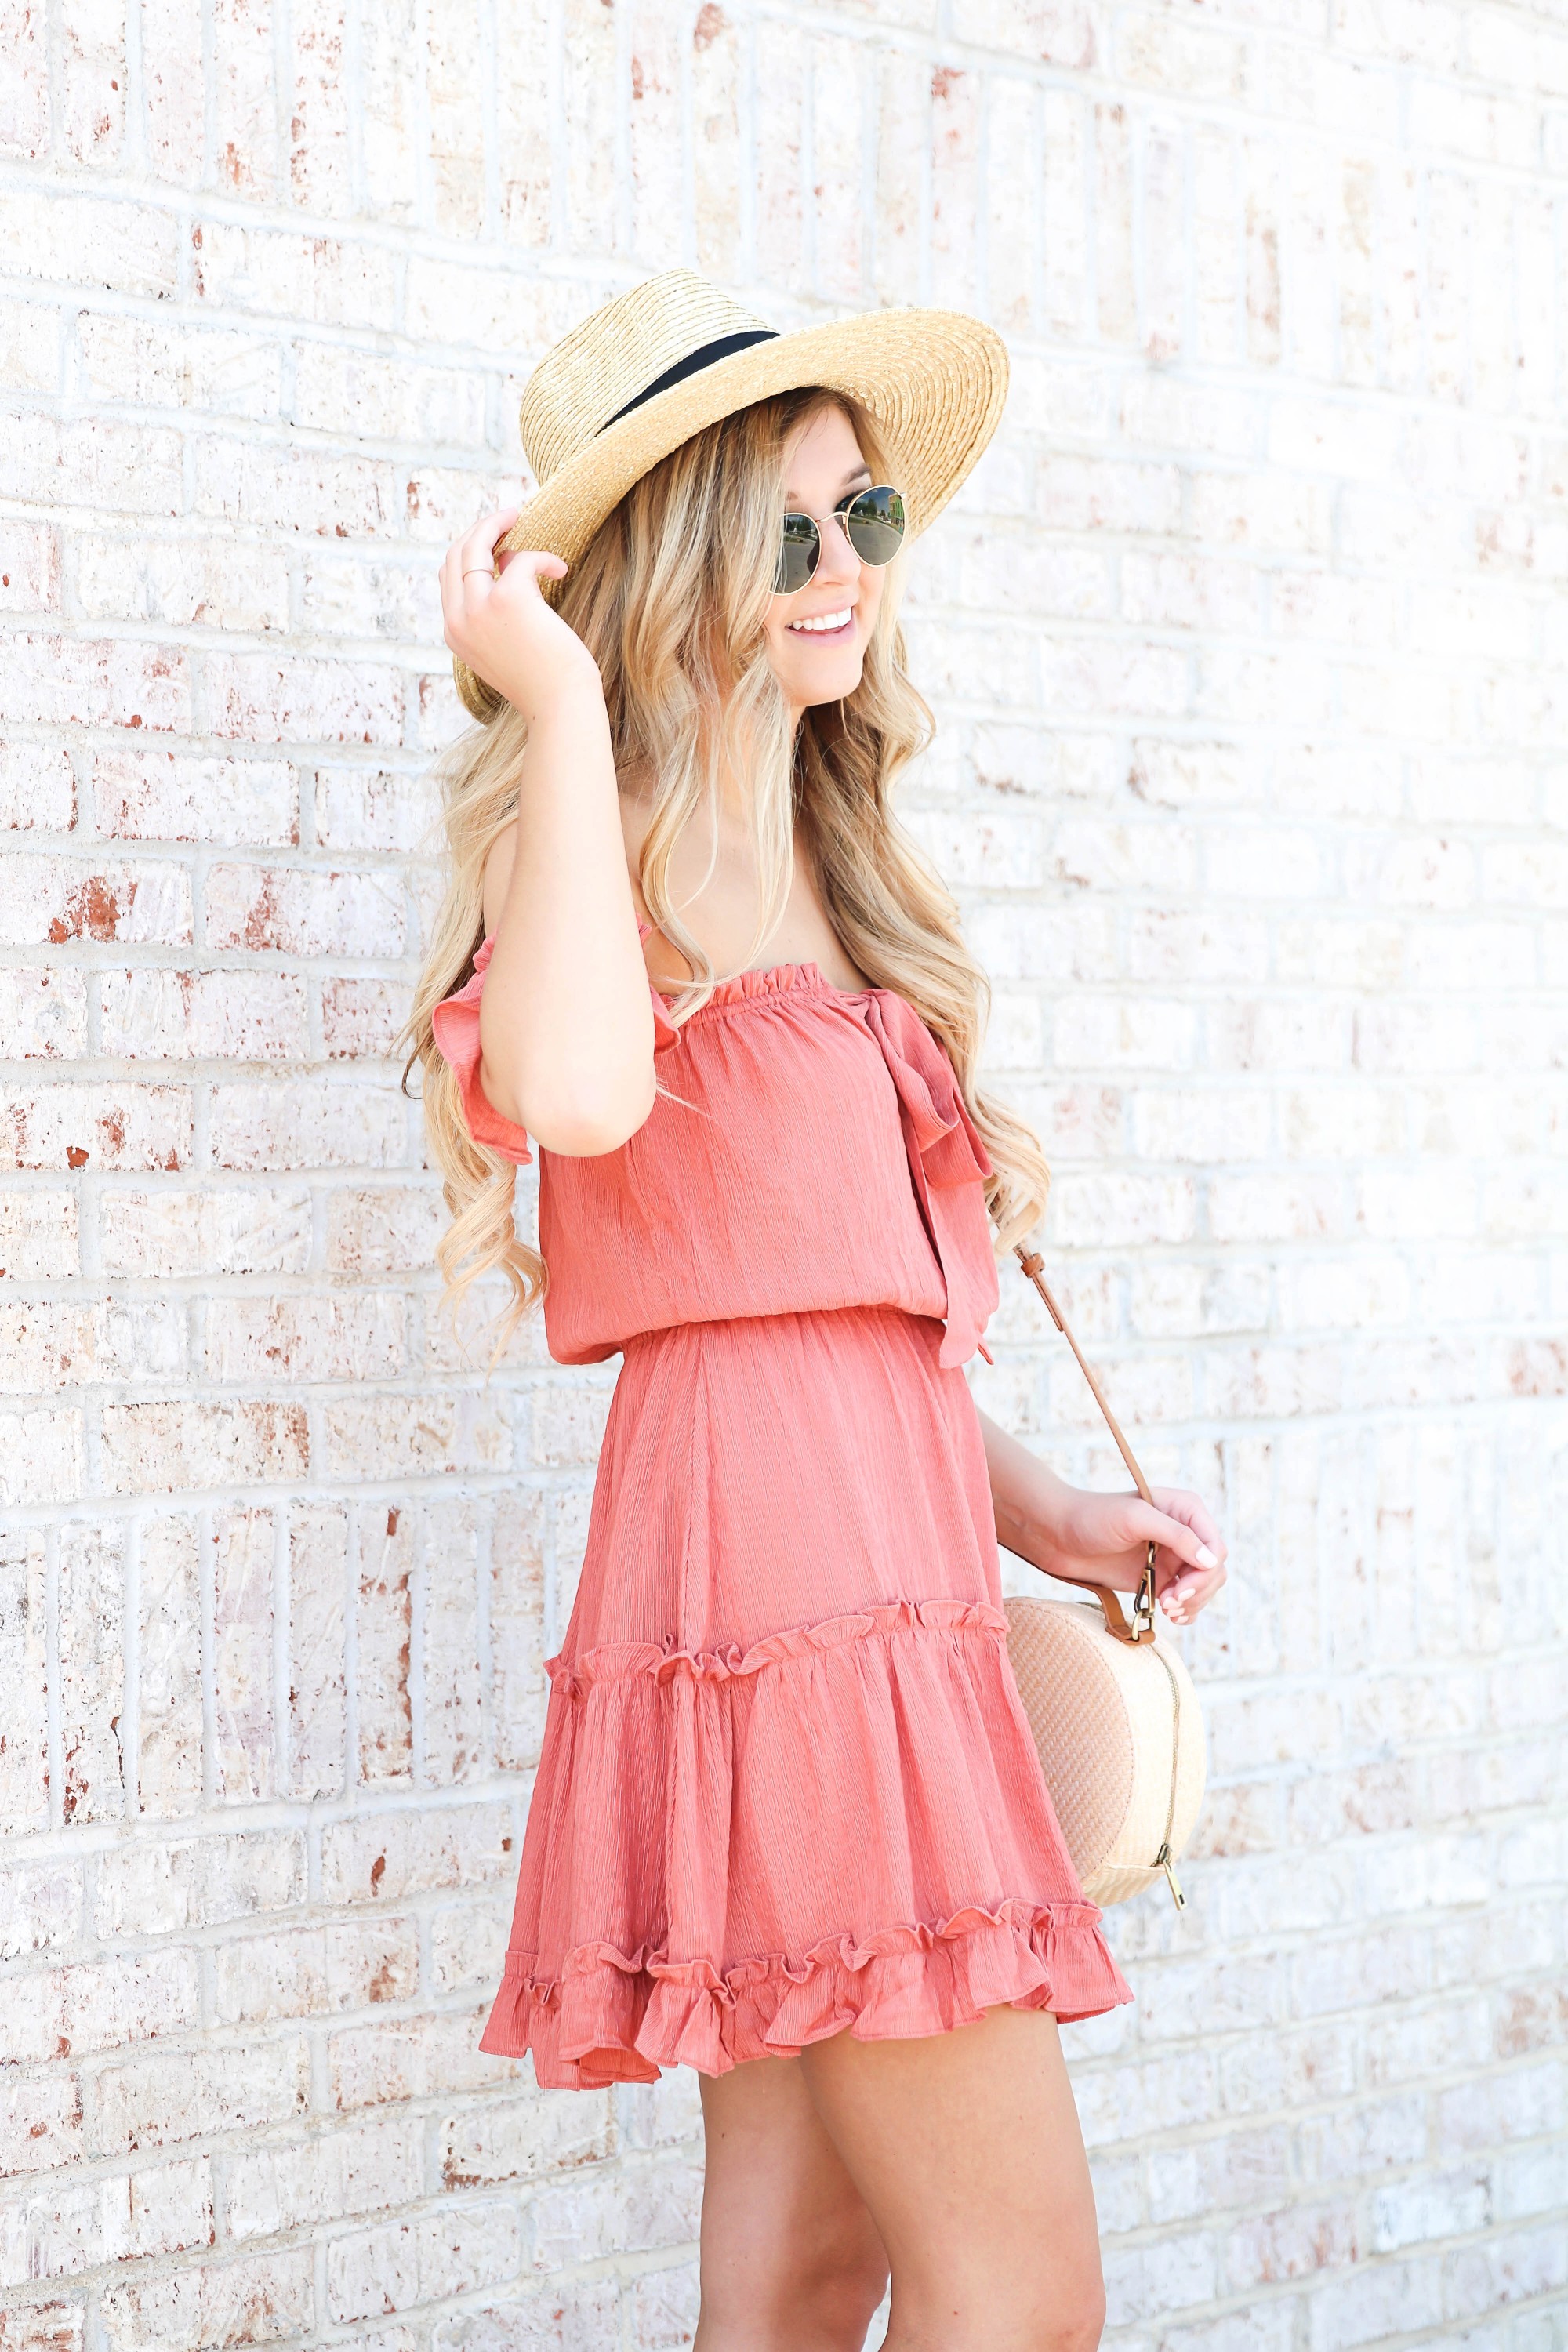 Coral tiered dress from Showpo paired with my favorite straw hat! This is the perfect summer beach hat and looks so cute with this summer sun dress! Summer fashion ideas on the blow! Details on fashion blog daily dose of charm by lauren lindmark